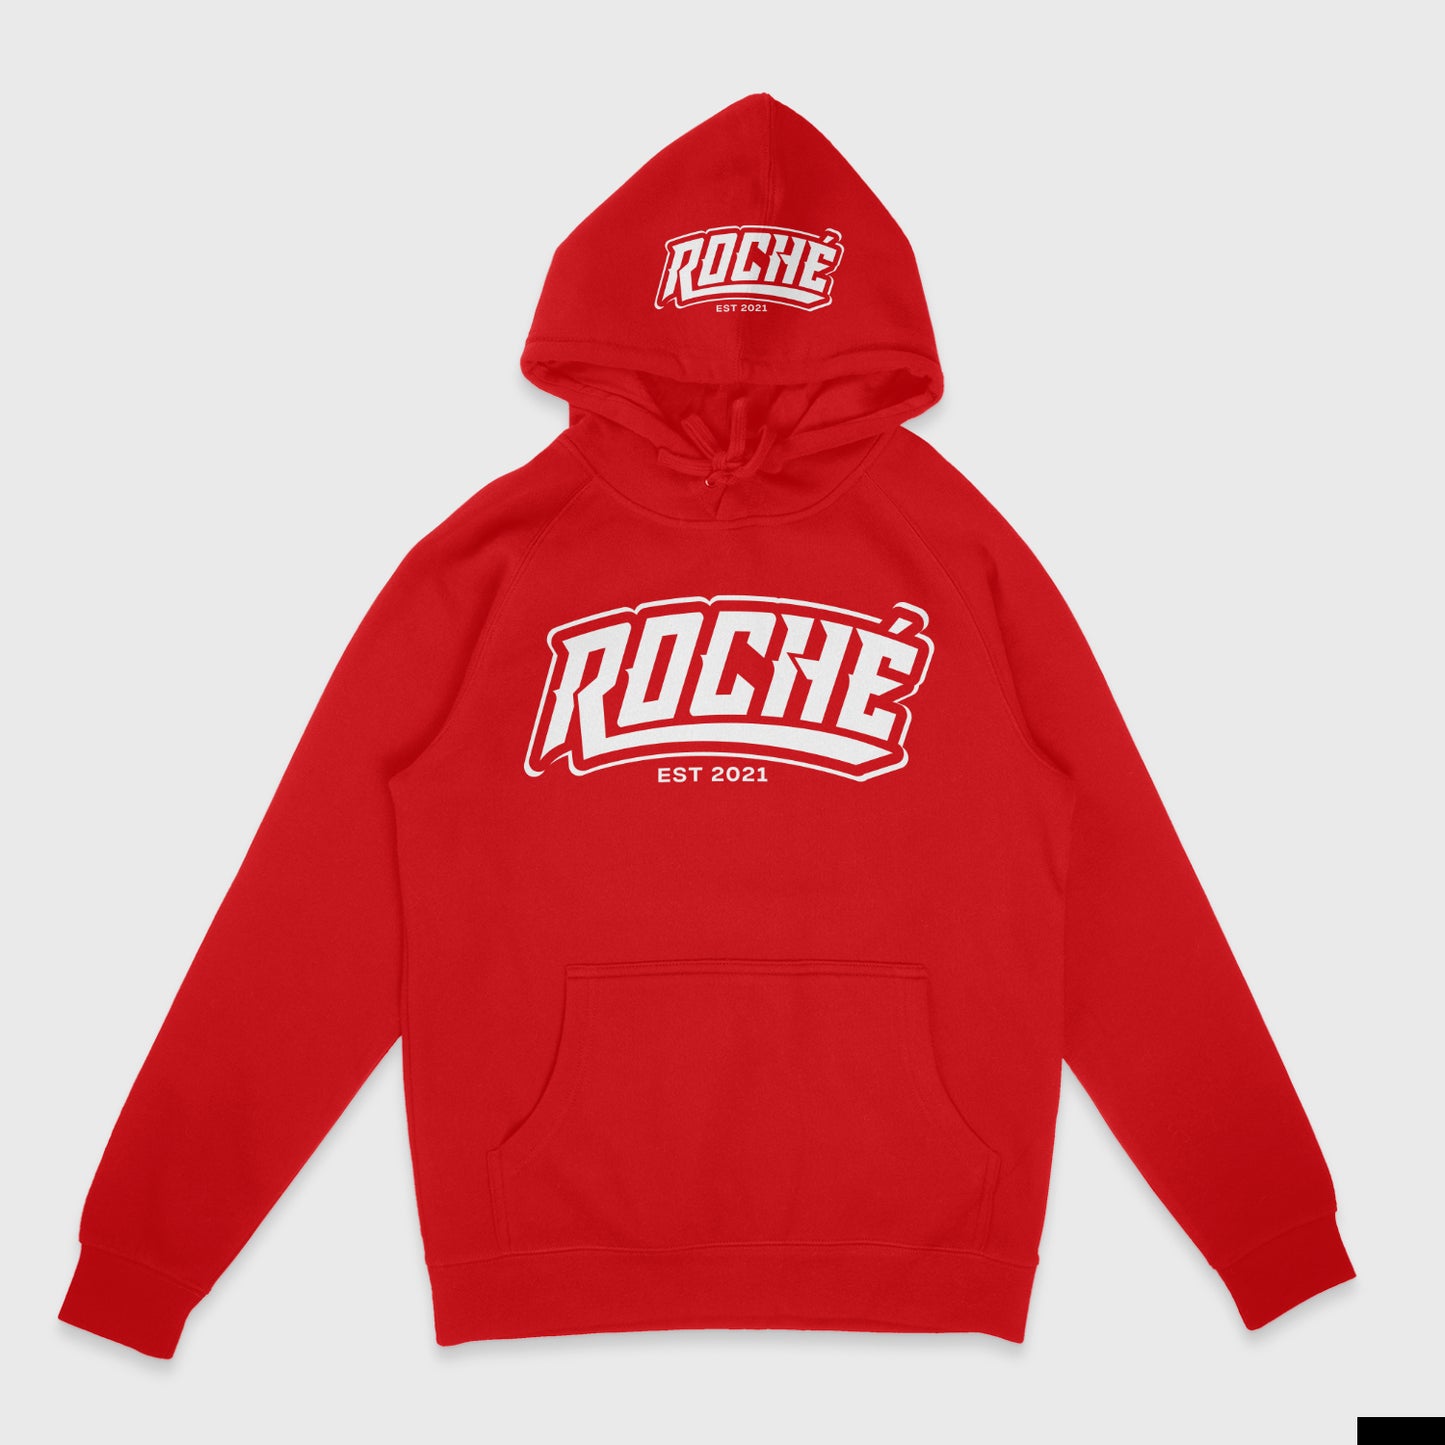 Roche Red Embroidered Unisex Hoodie